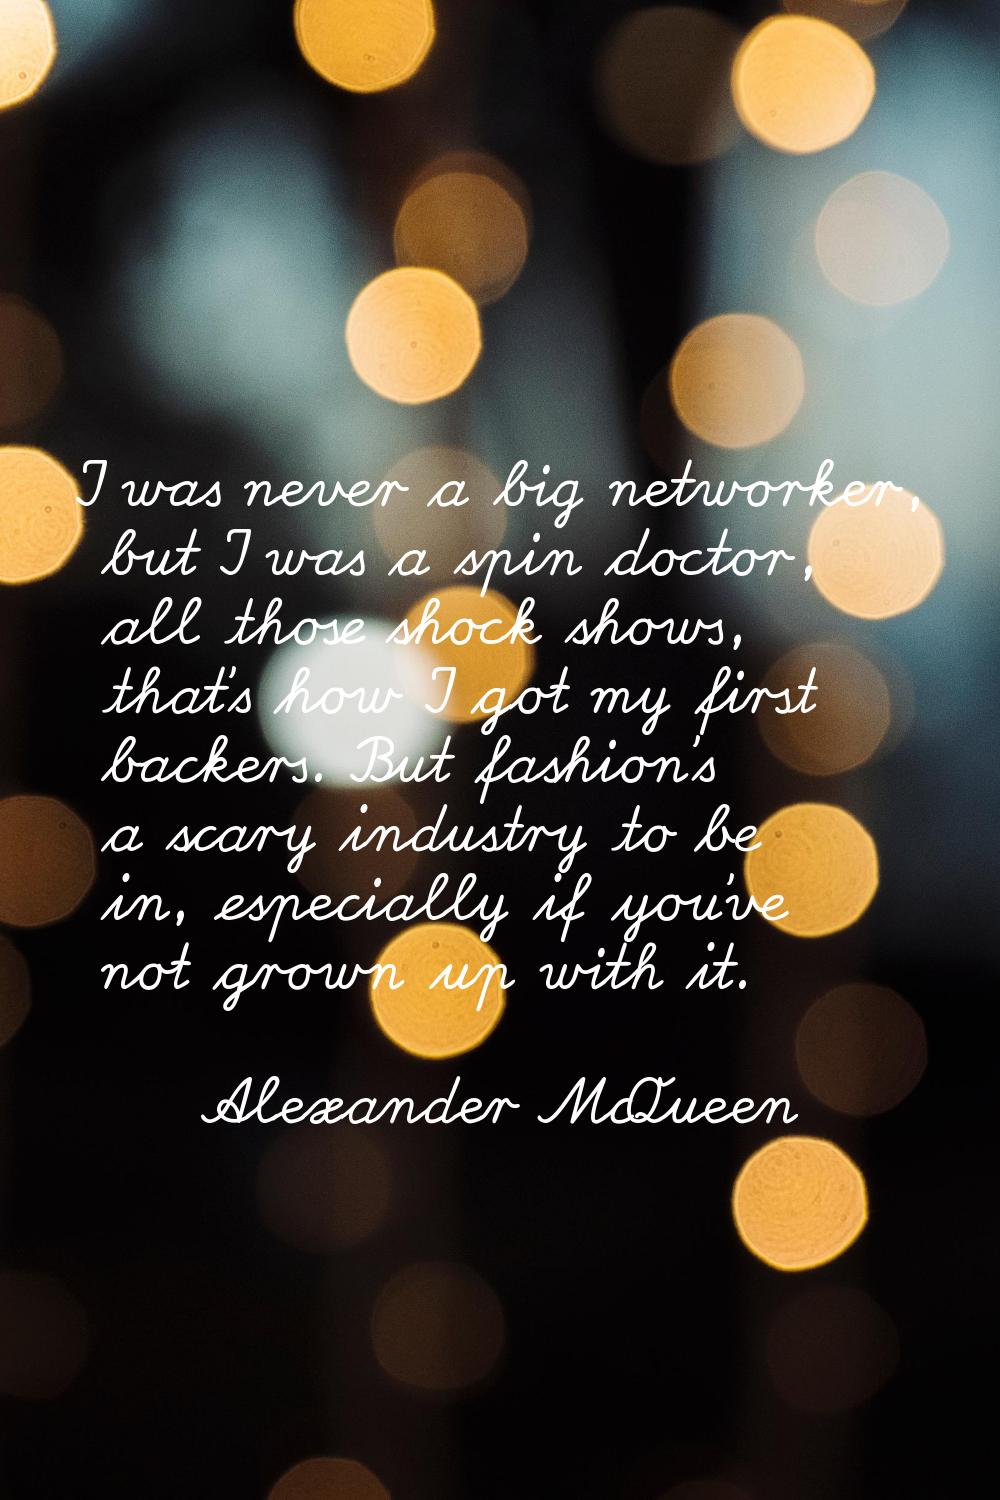 I was never a big networker, but I was a spin doctor, all those shock shows, that's how I got my fi